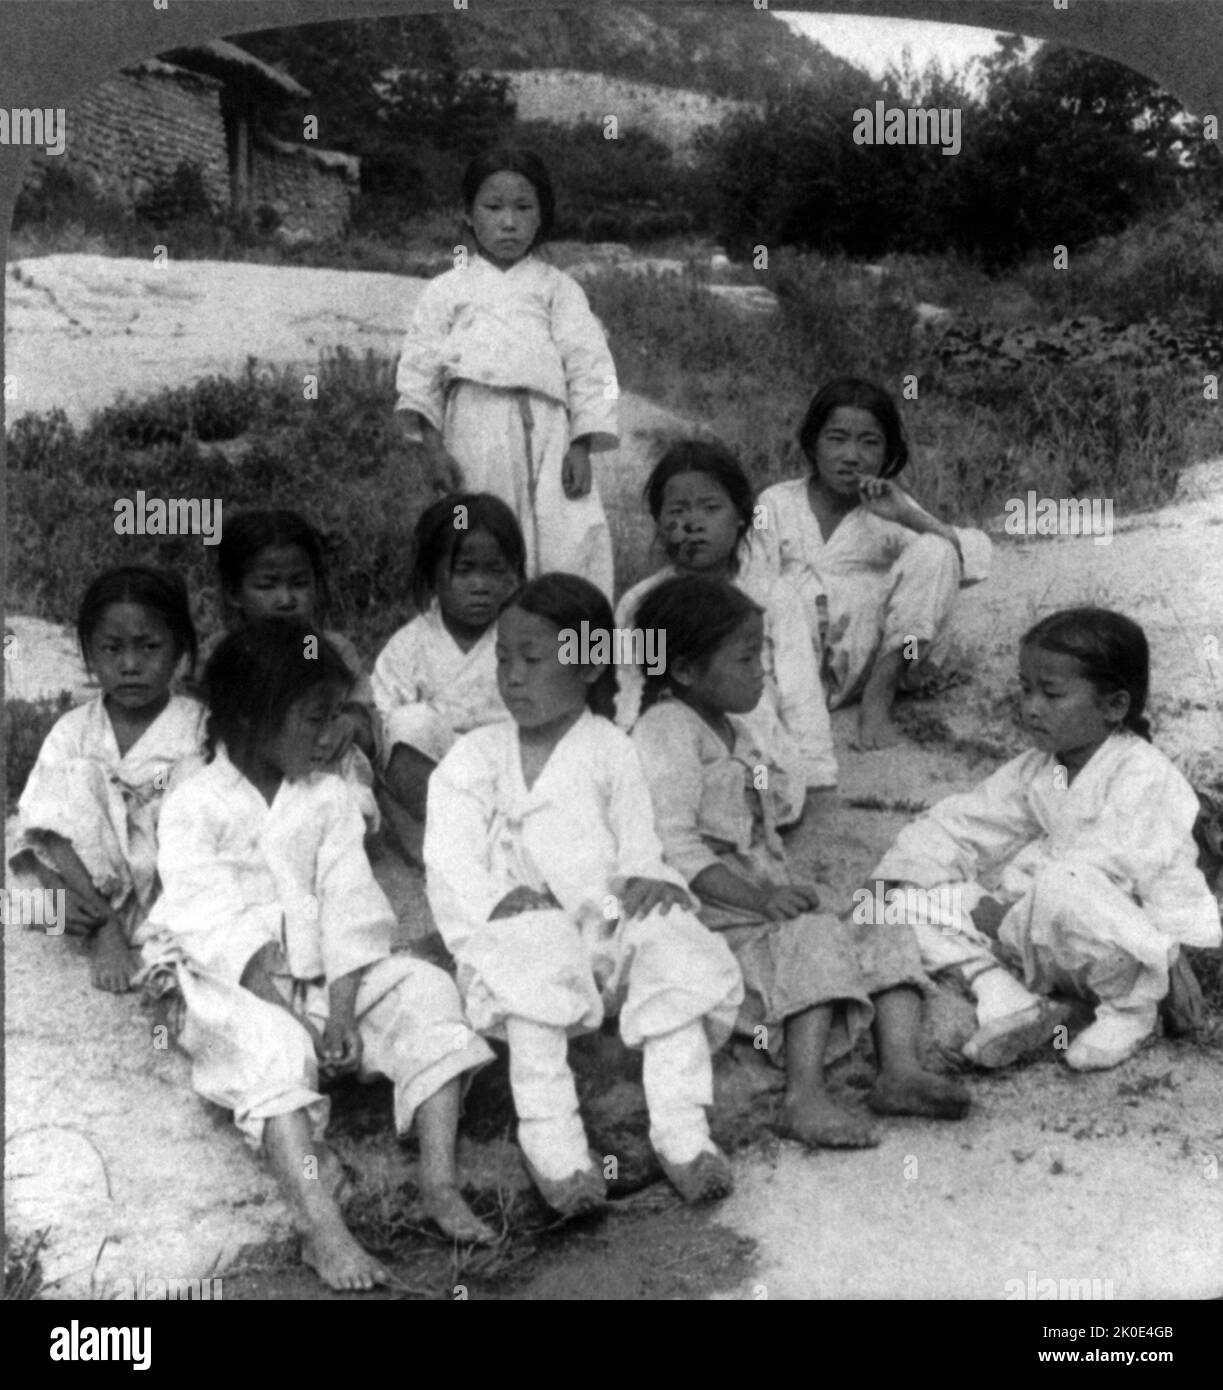 Photograph showing Joseon era boys from a poor area wearing torn clothes. Seoul, Korea 1900. Stock Photo